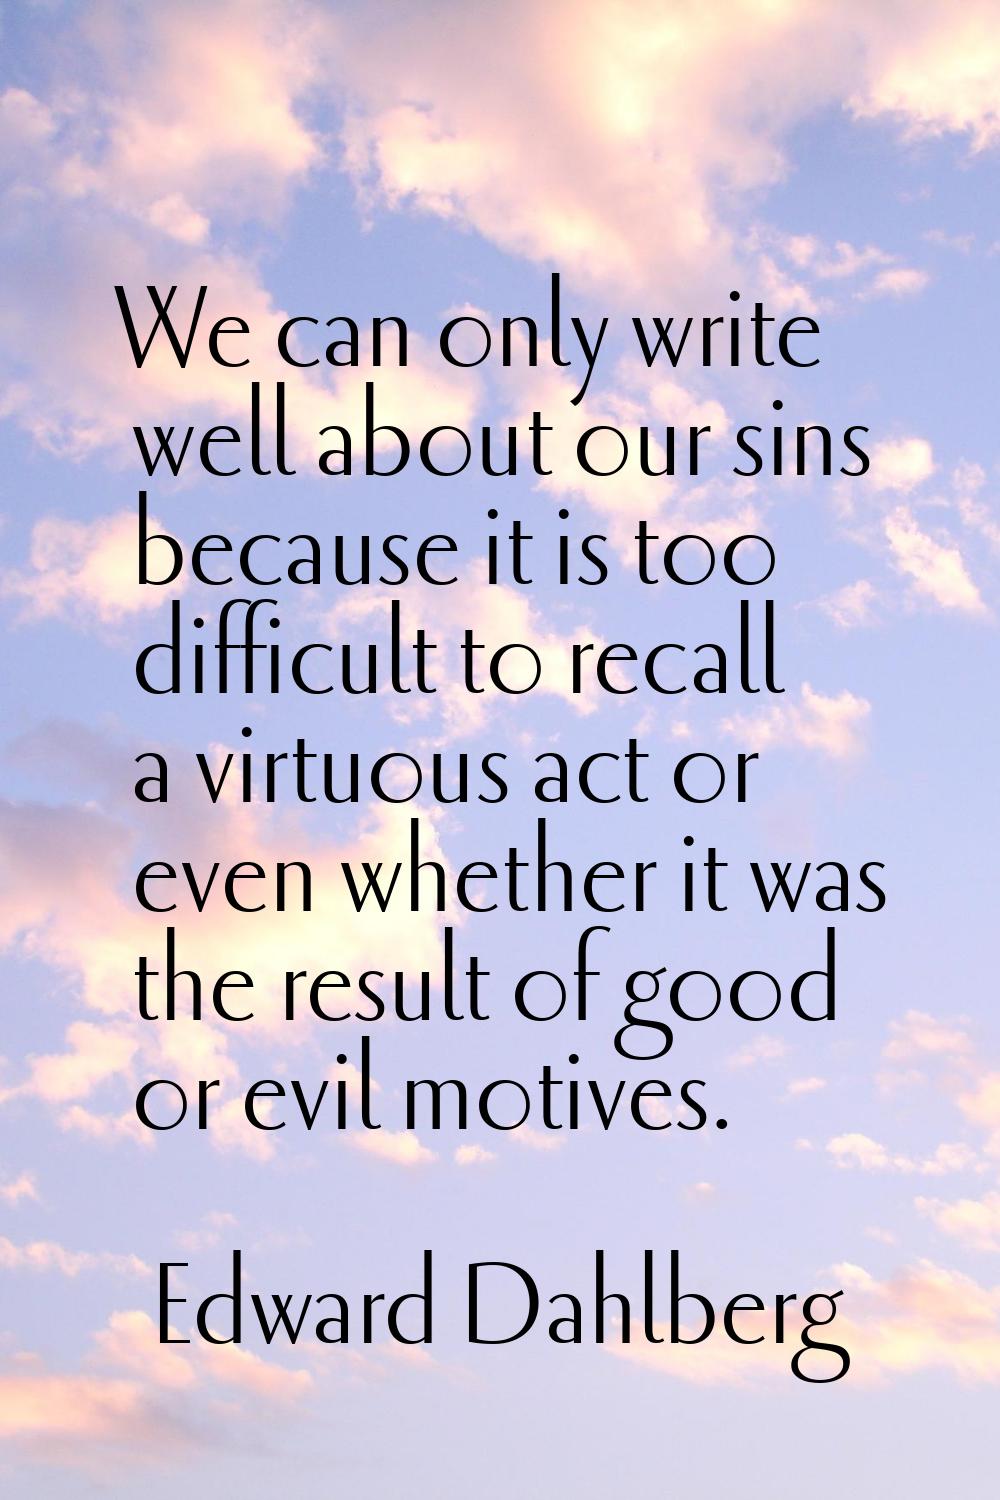 We can only write well about our sins because it is too difficult to recall a virtuous act or even 